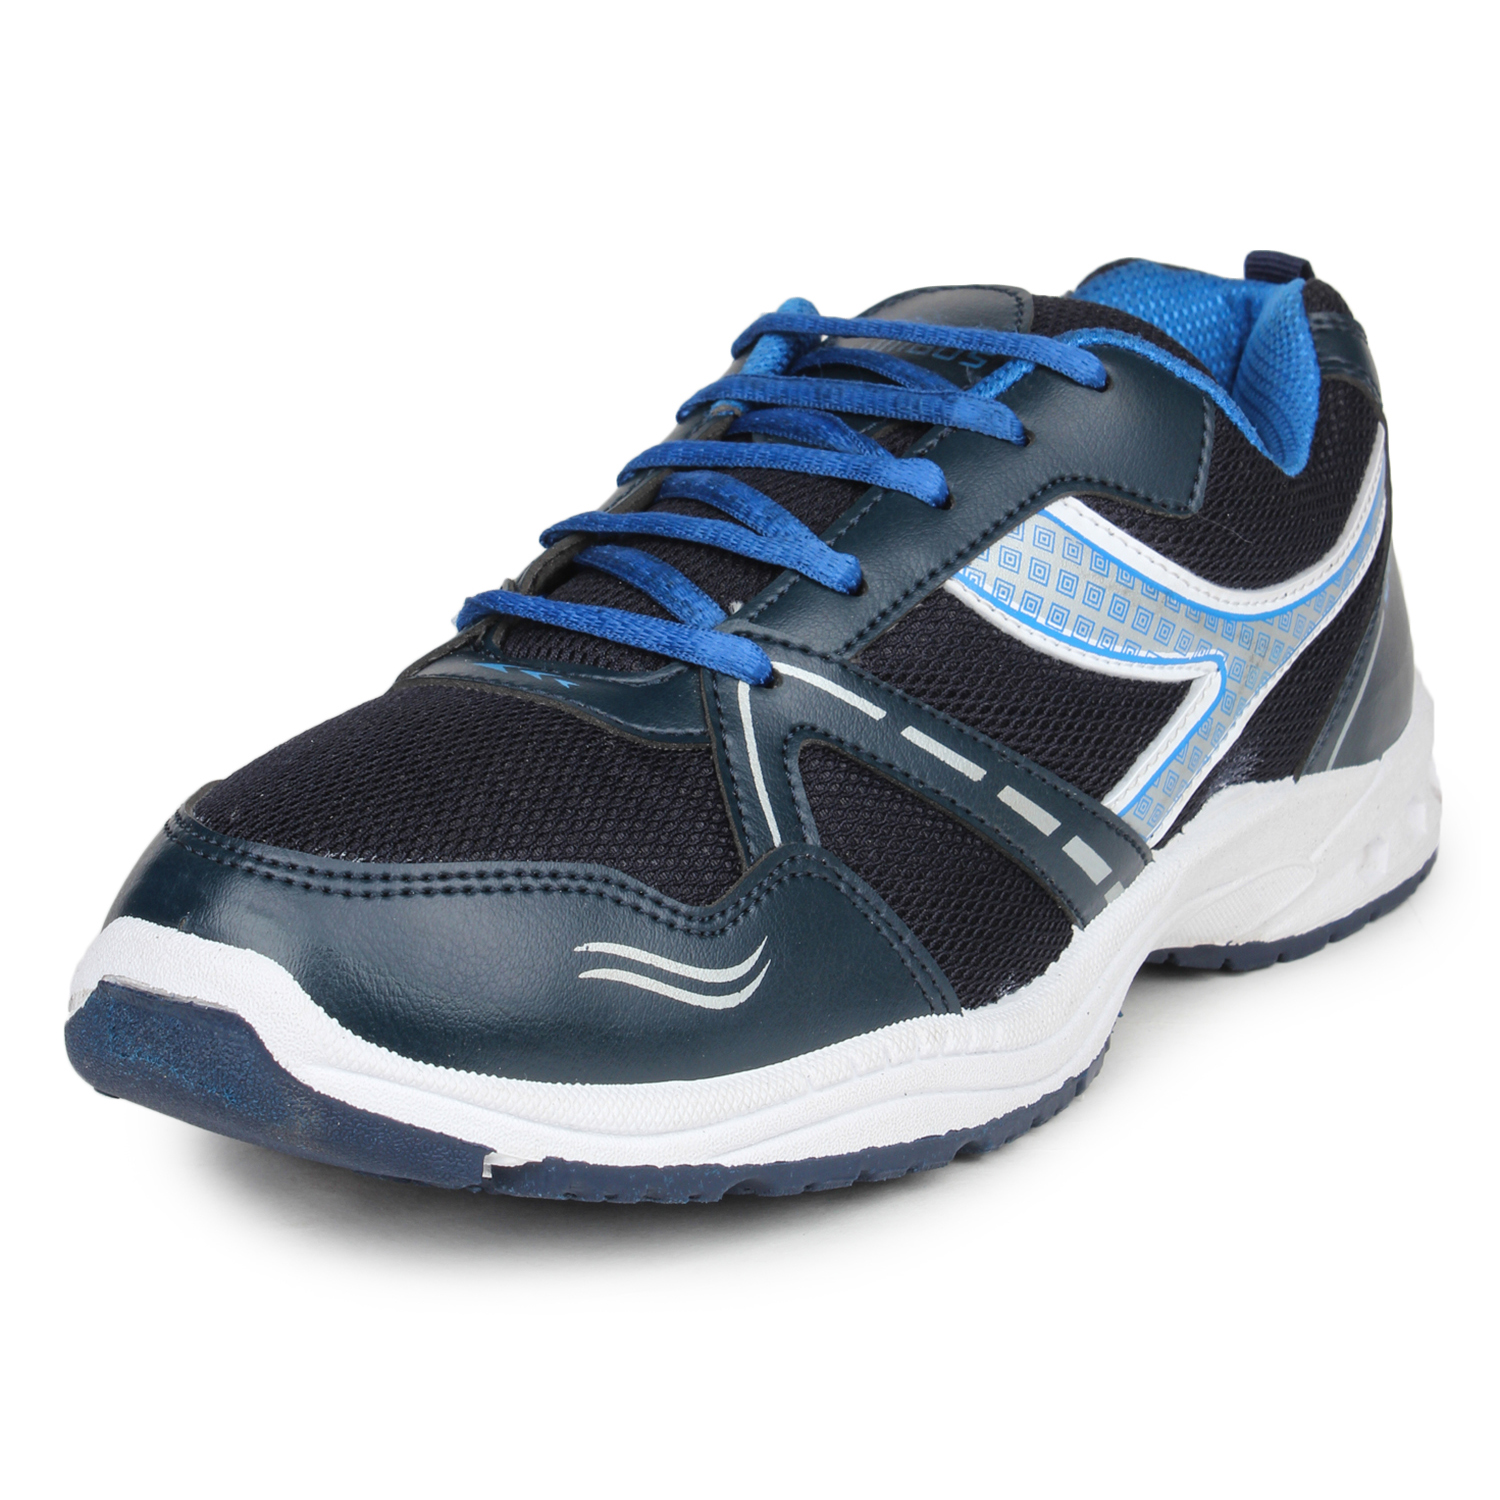 Buy Columbus Women's Blue Sports Shoes Online @ ₹499 from ShopClues